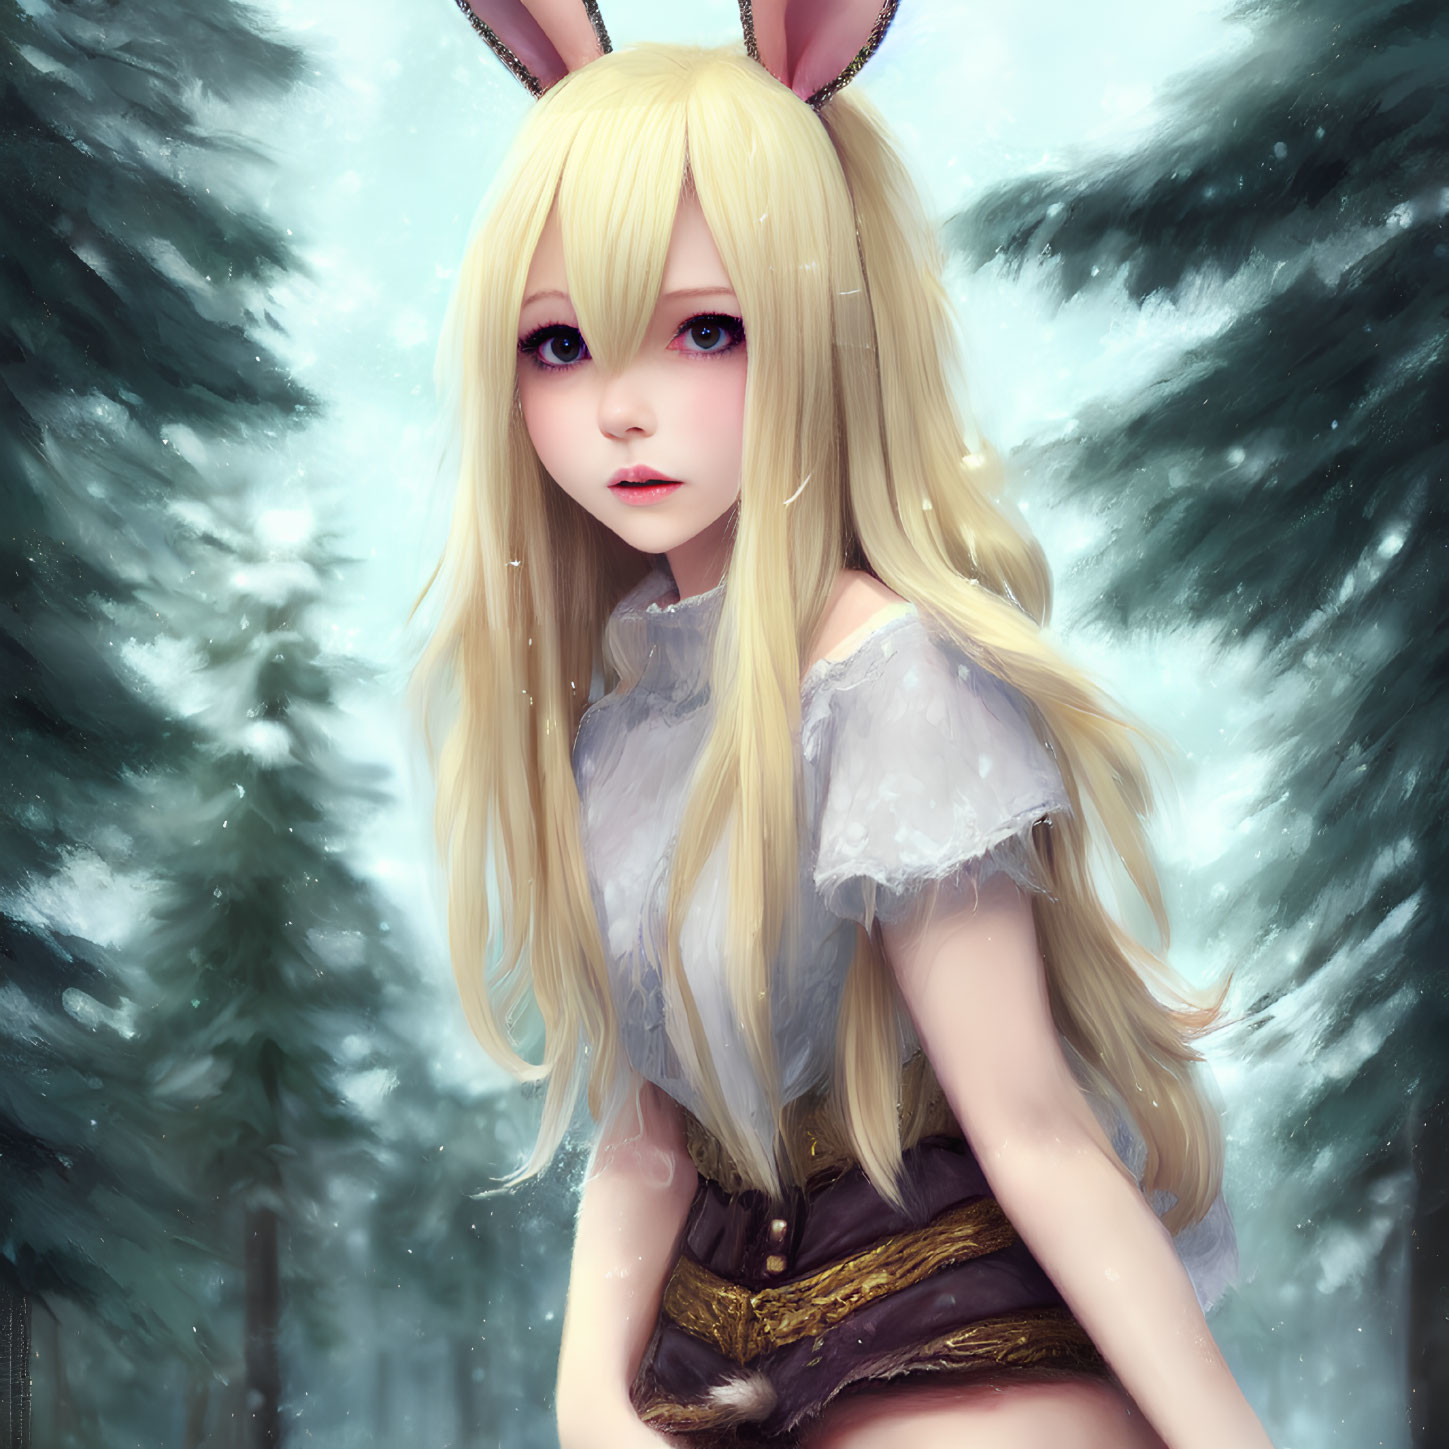 Stylized illustration of girl with rabbit ears and red eyes in wintry forest